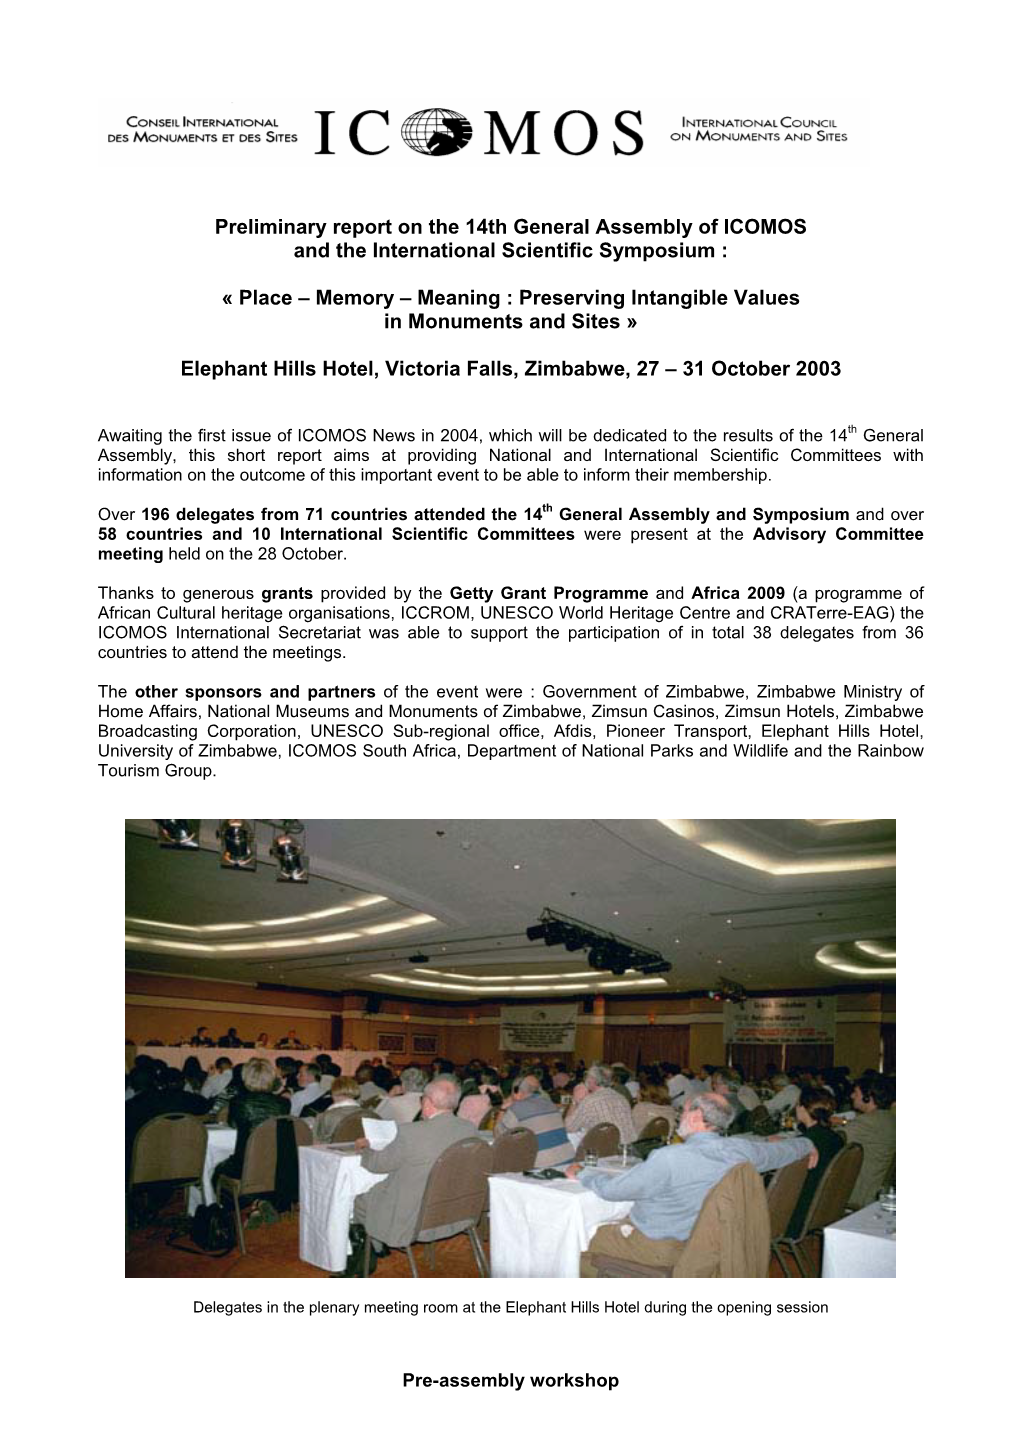 Preliminary Report on the 14Th General Assembly of ICOMOS and the International Scientific Symposium